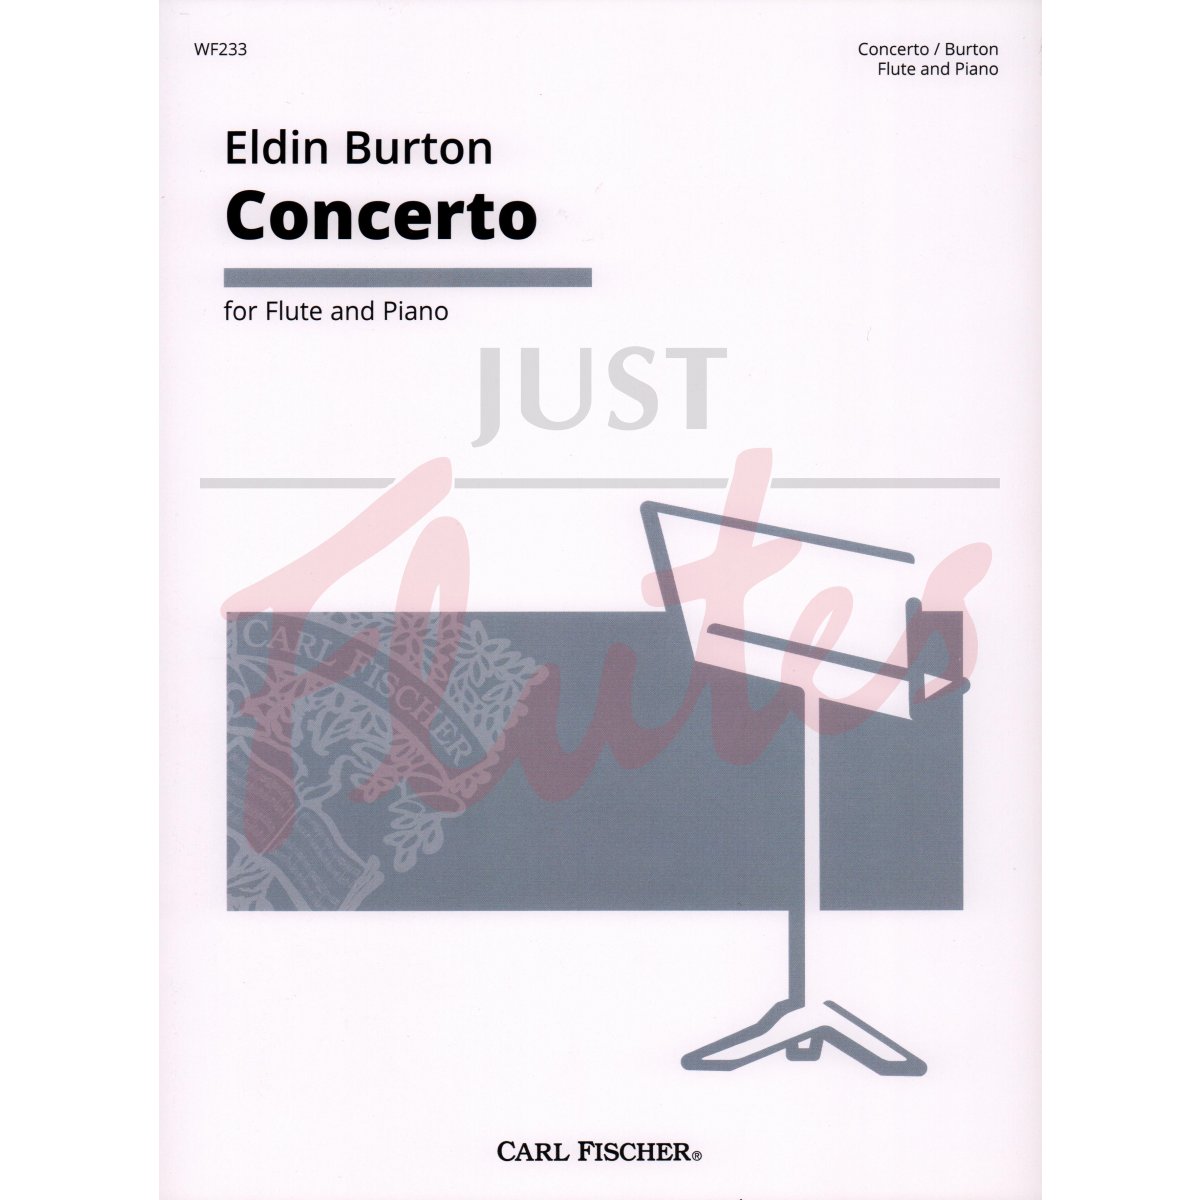 Concerto for Flute and Piano